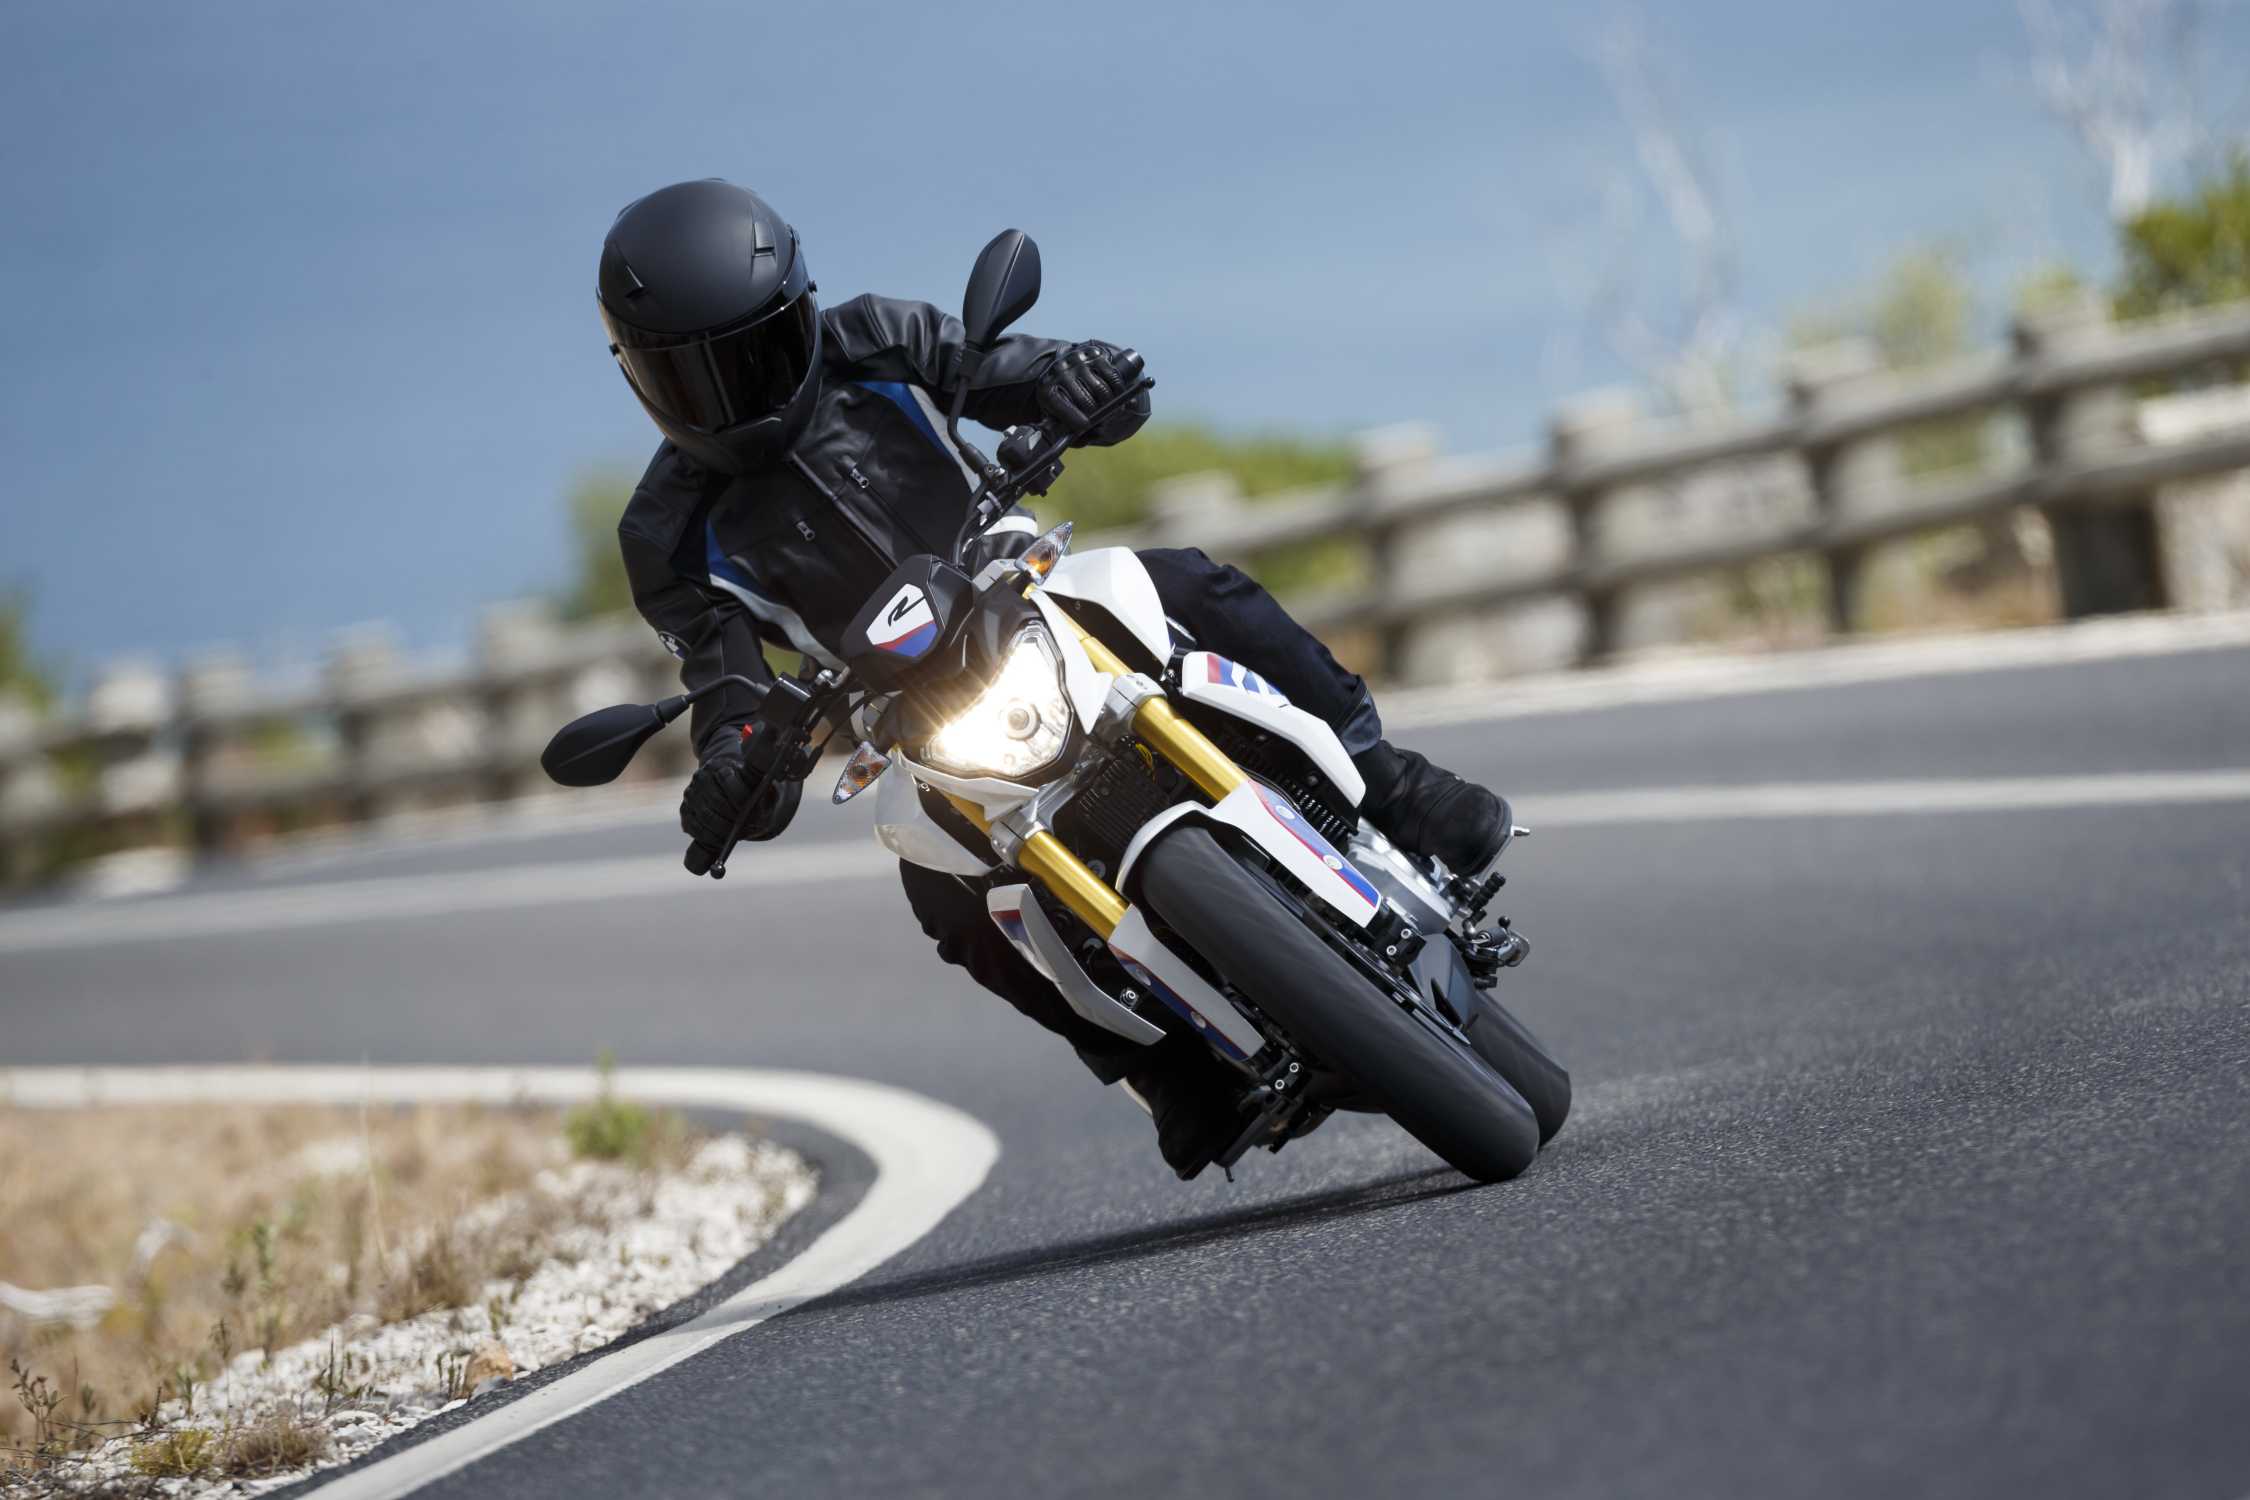 The New Bmw G 310 R